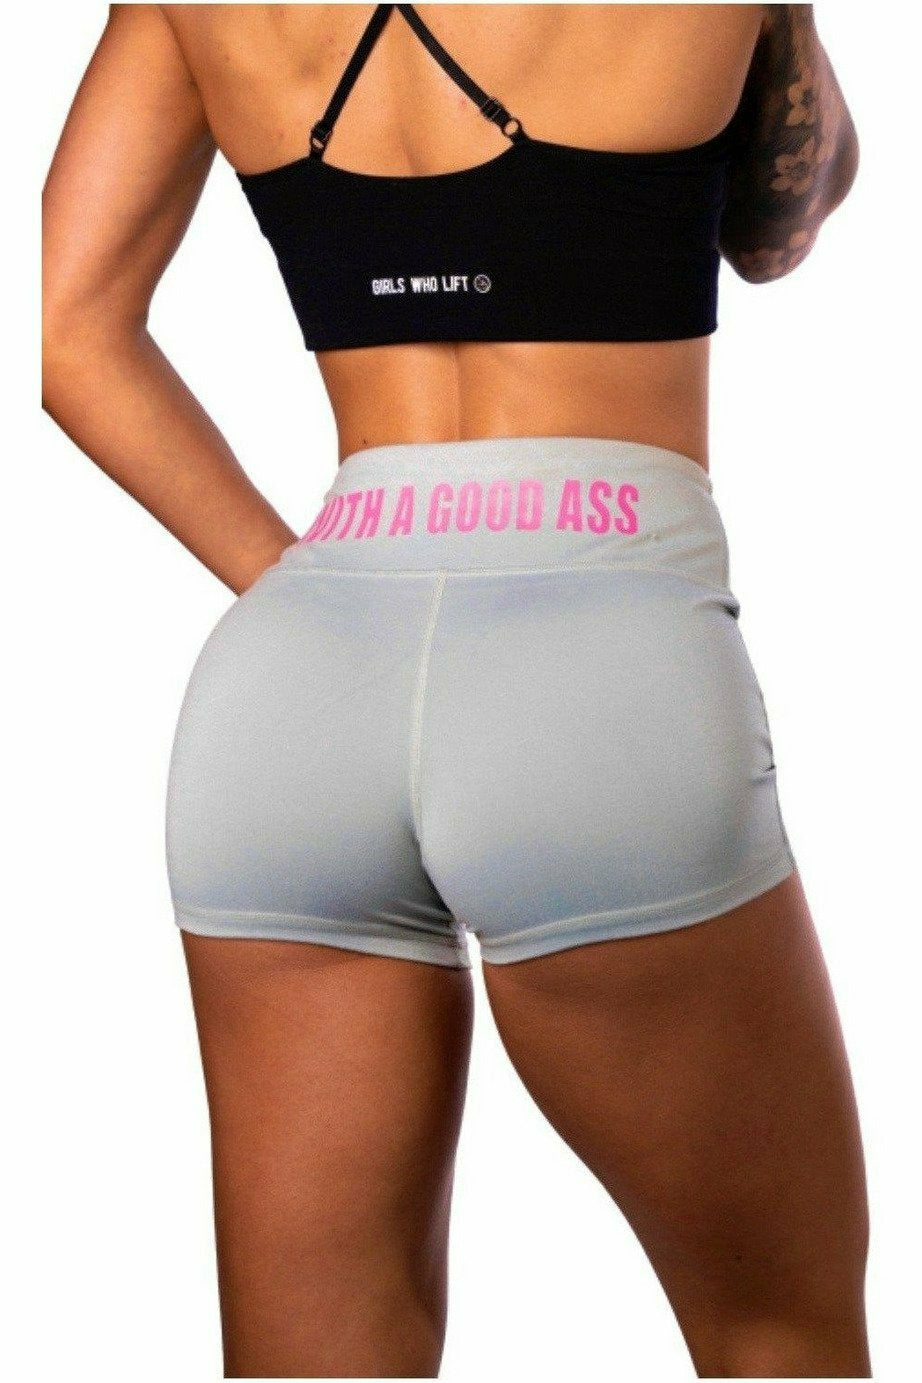 carolina york recommends hot girls in tight booty shorts pic